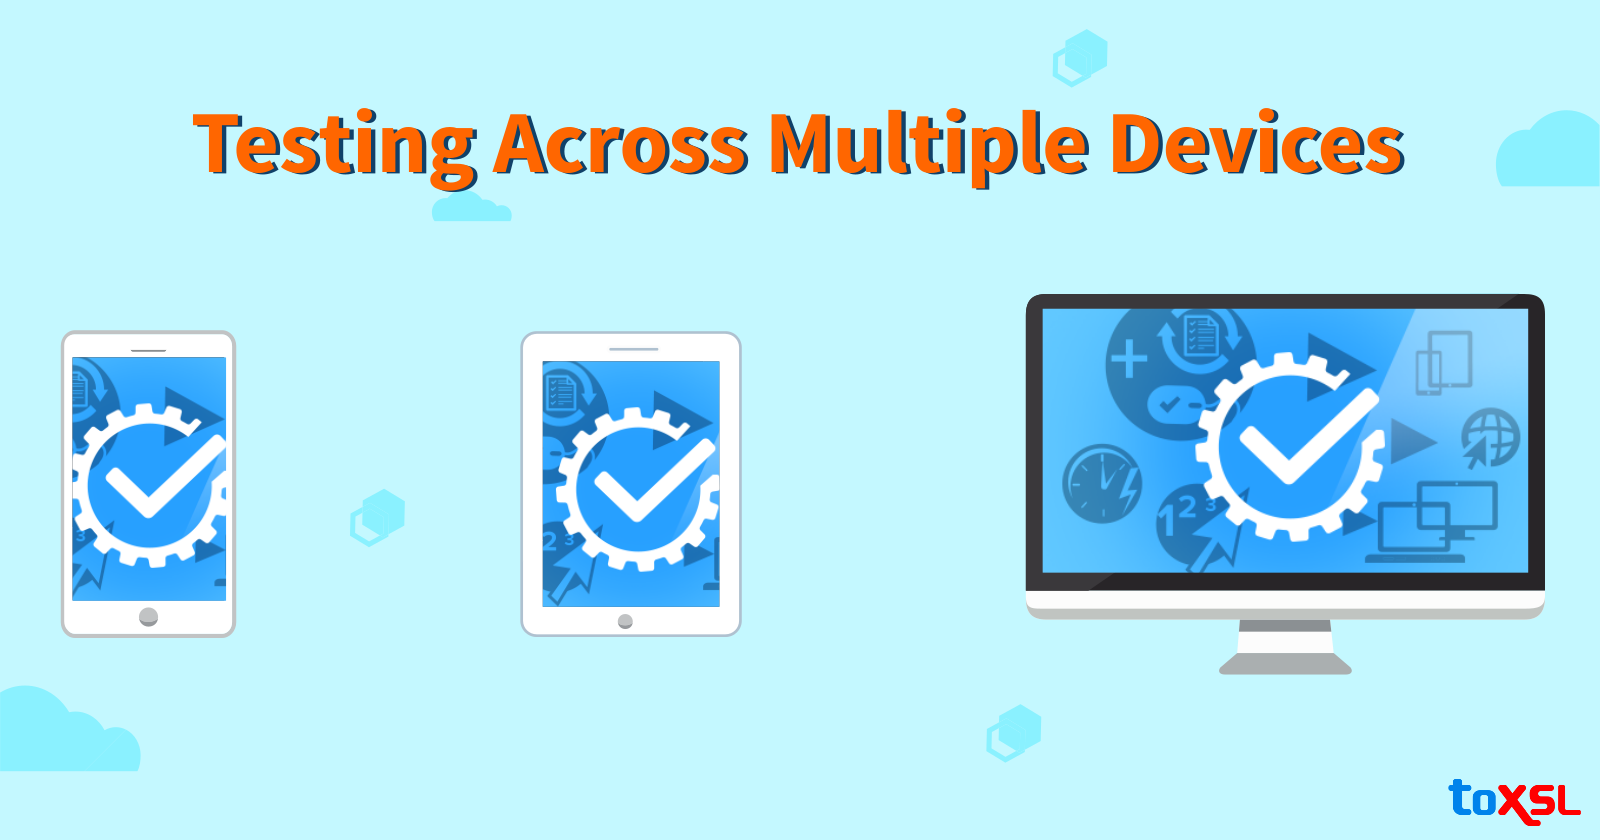 Why Testing Across Multiple Devices is Important?